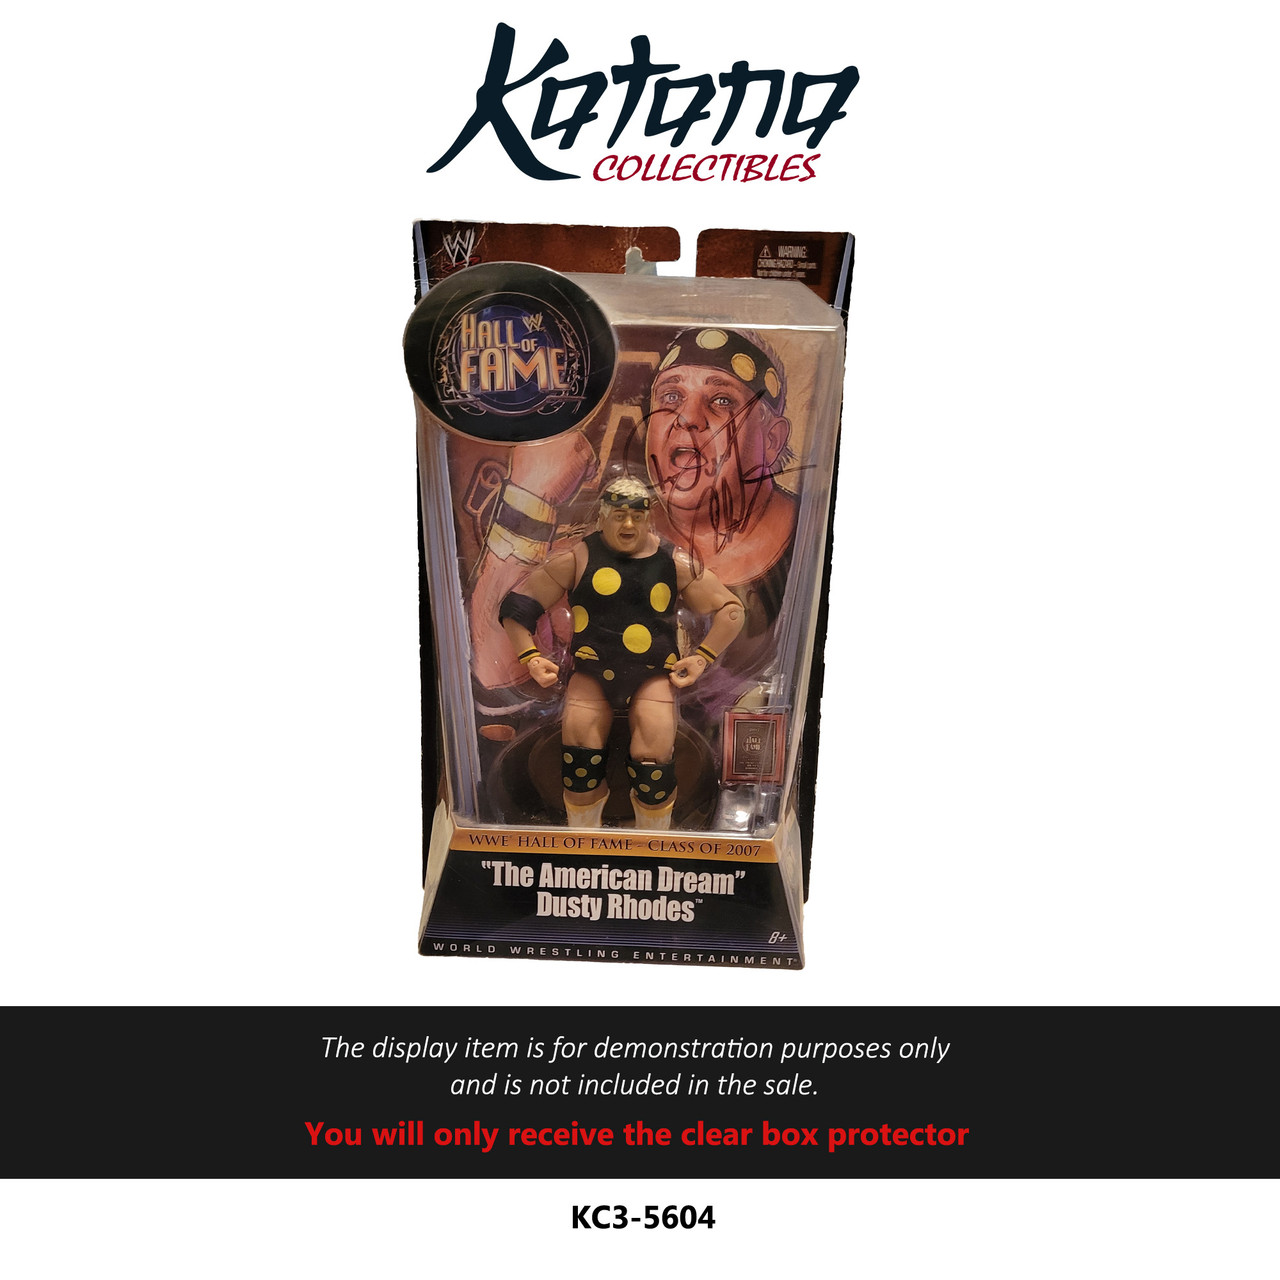 Katana Collectibles Protector For 2010 WWE Mattel Elite Collection Legends Hall Of Fame "American Dream" Dusty Rhodes